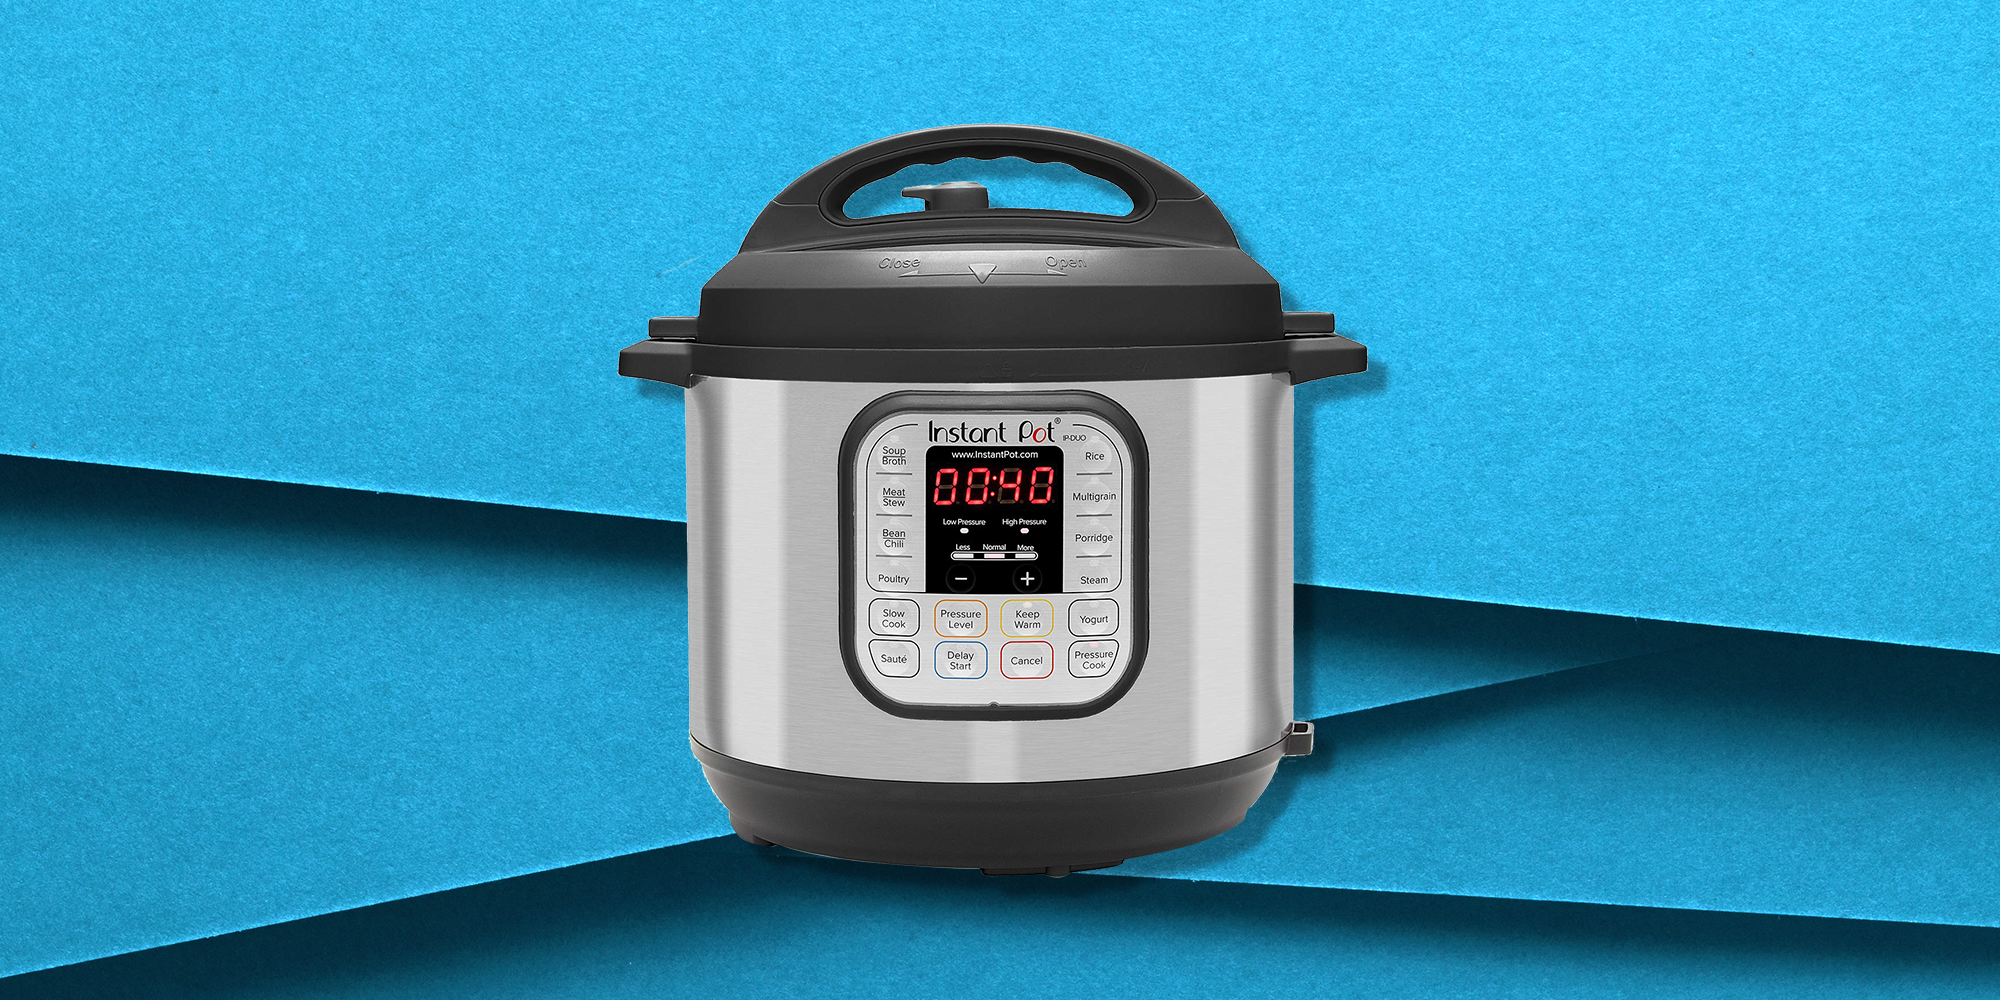 Upgrade your holiday kitchen arsenal with an 8-qt. Instant Pot